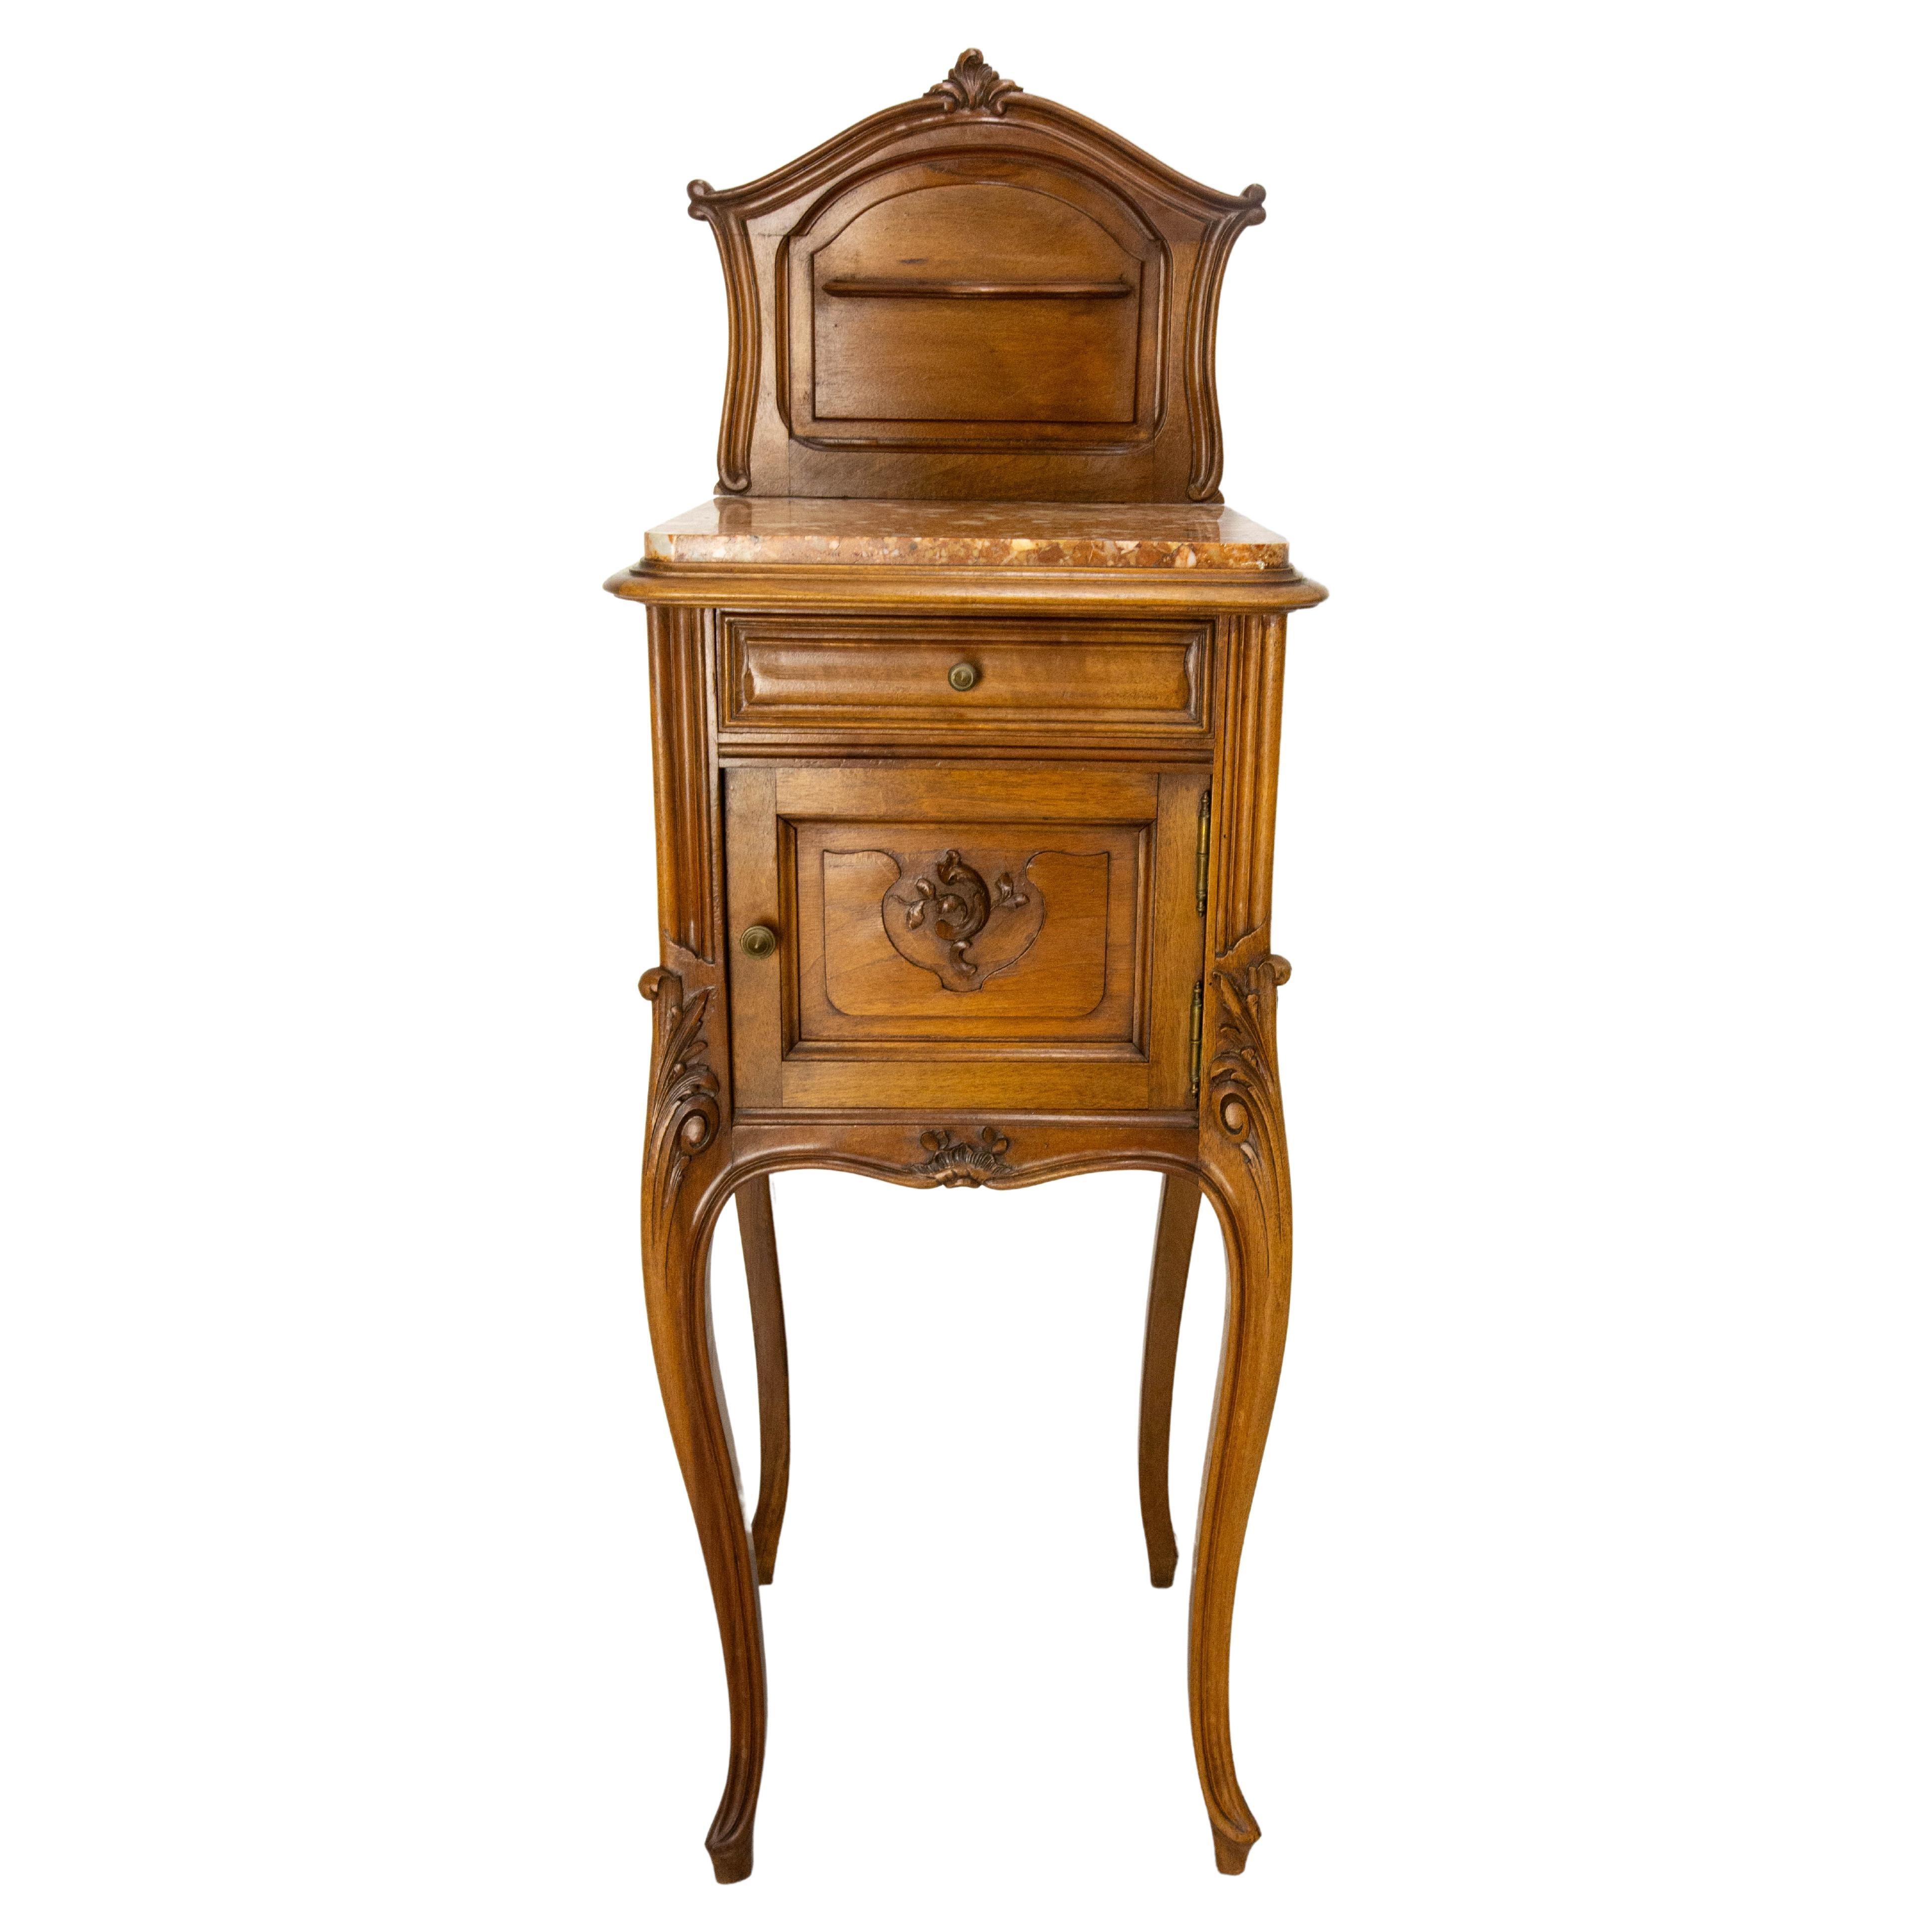 Louis XV St Side Cabinet Nightstand French Walnut Bedside Marbletop Table c 1900